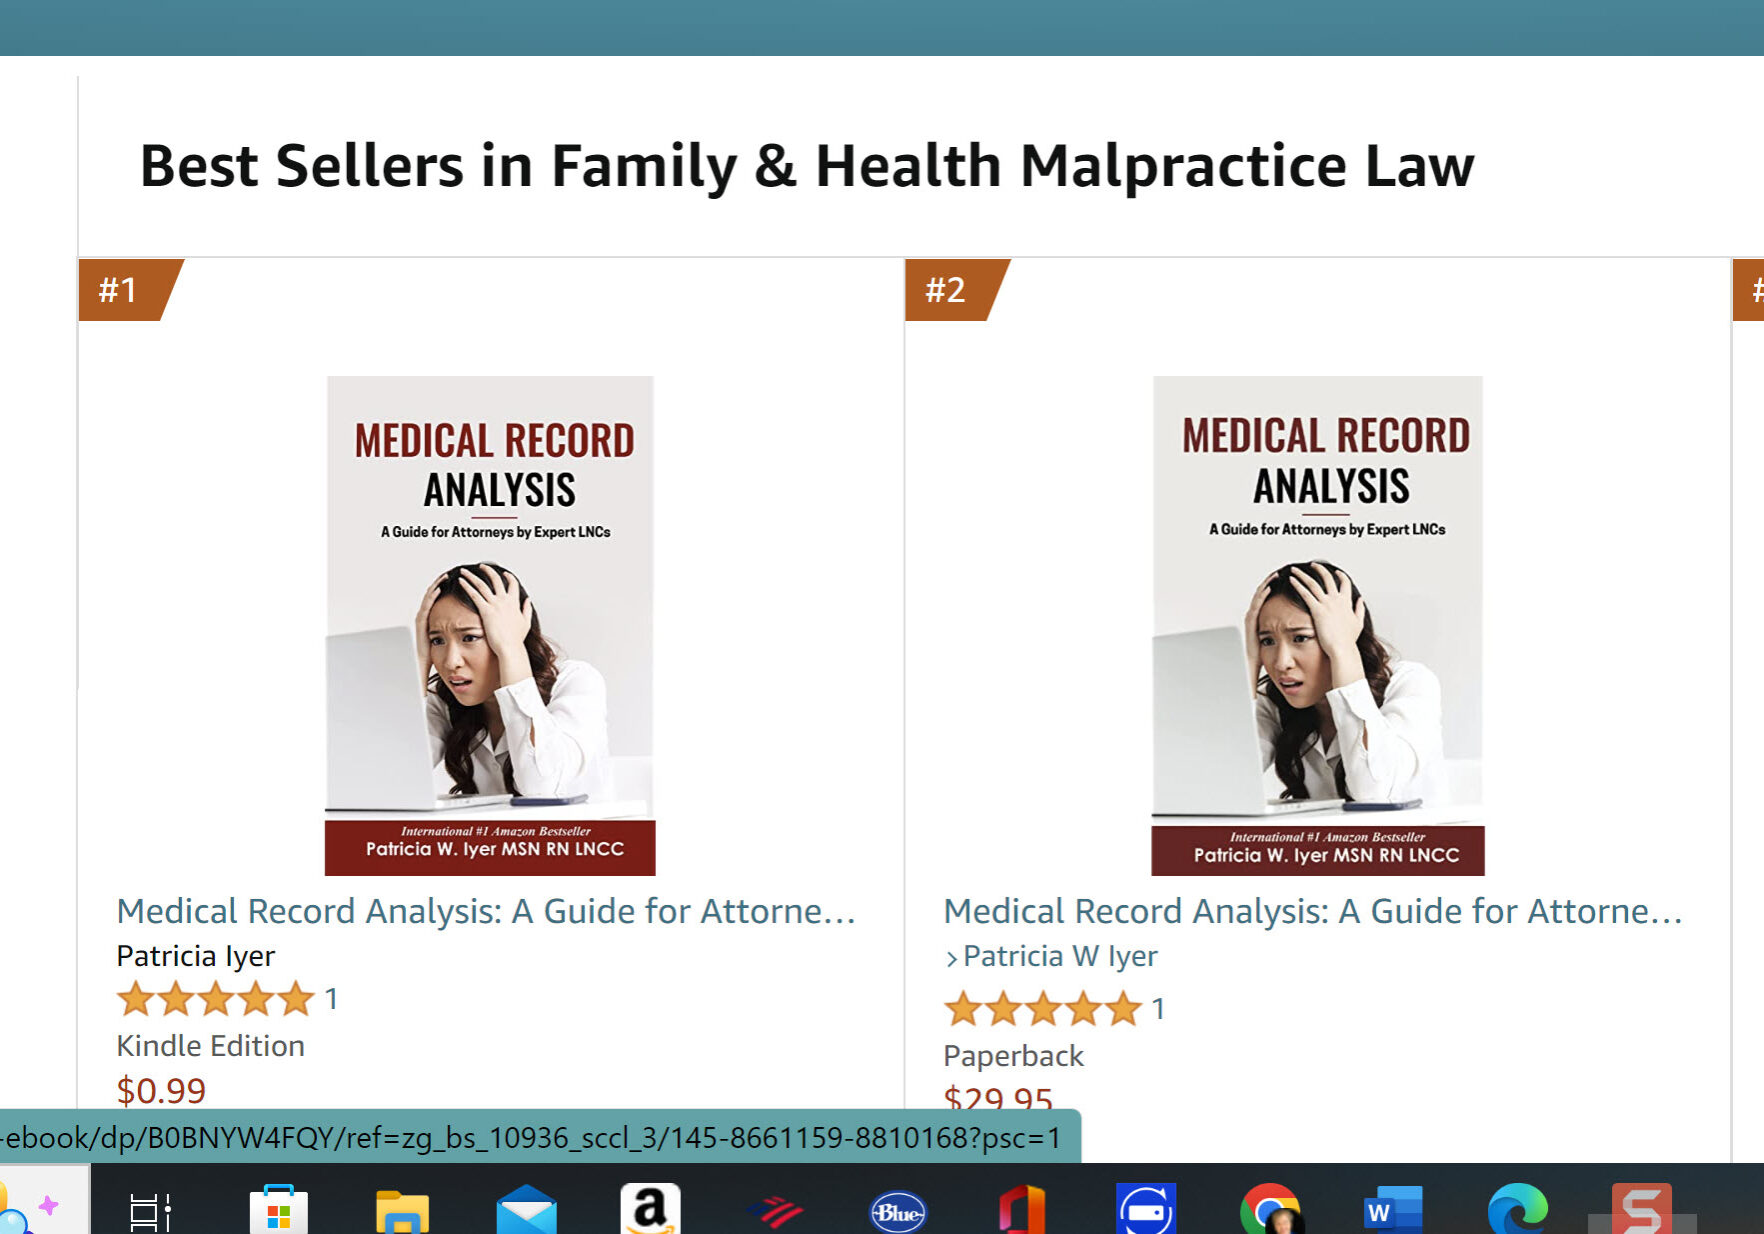 Family and Malpractice Law #1